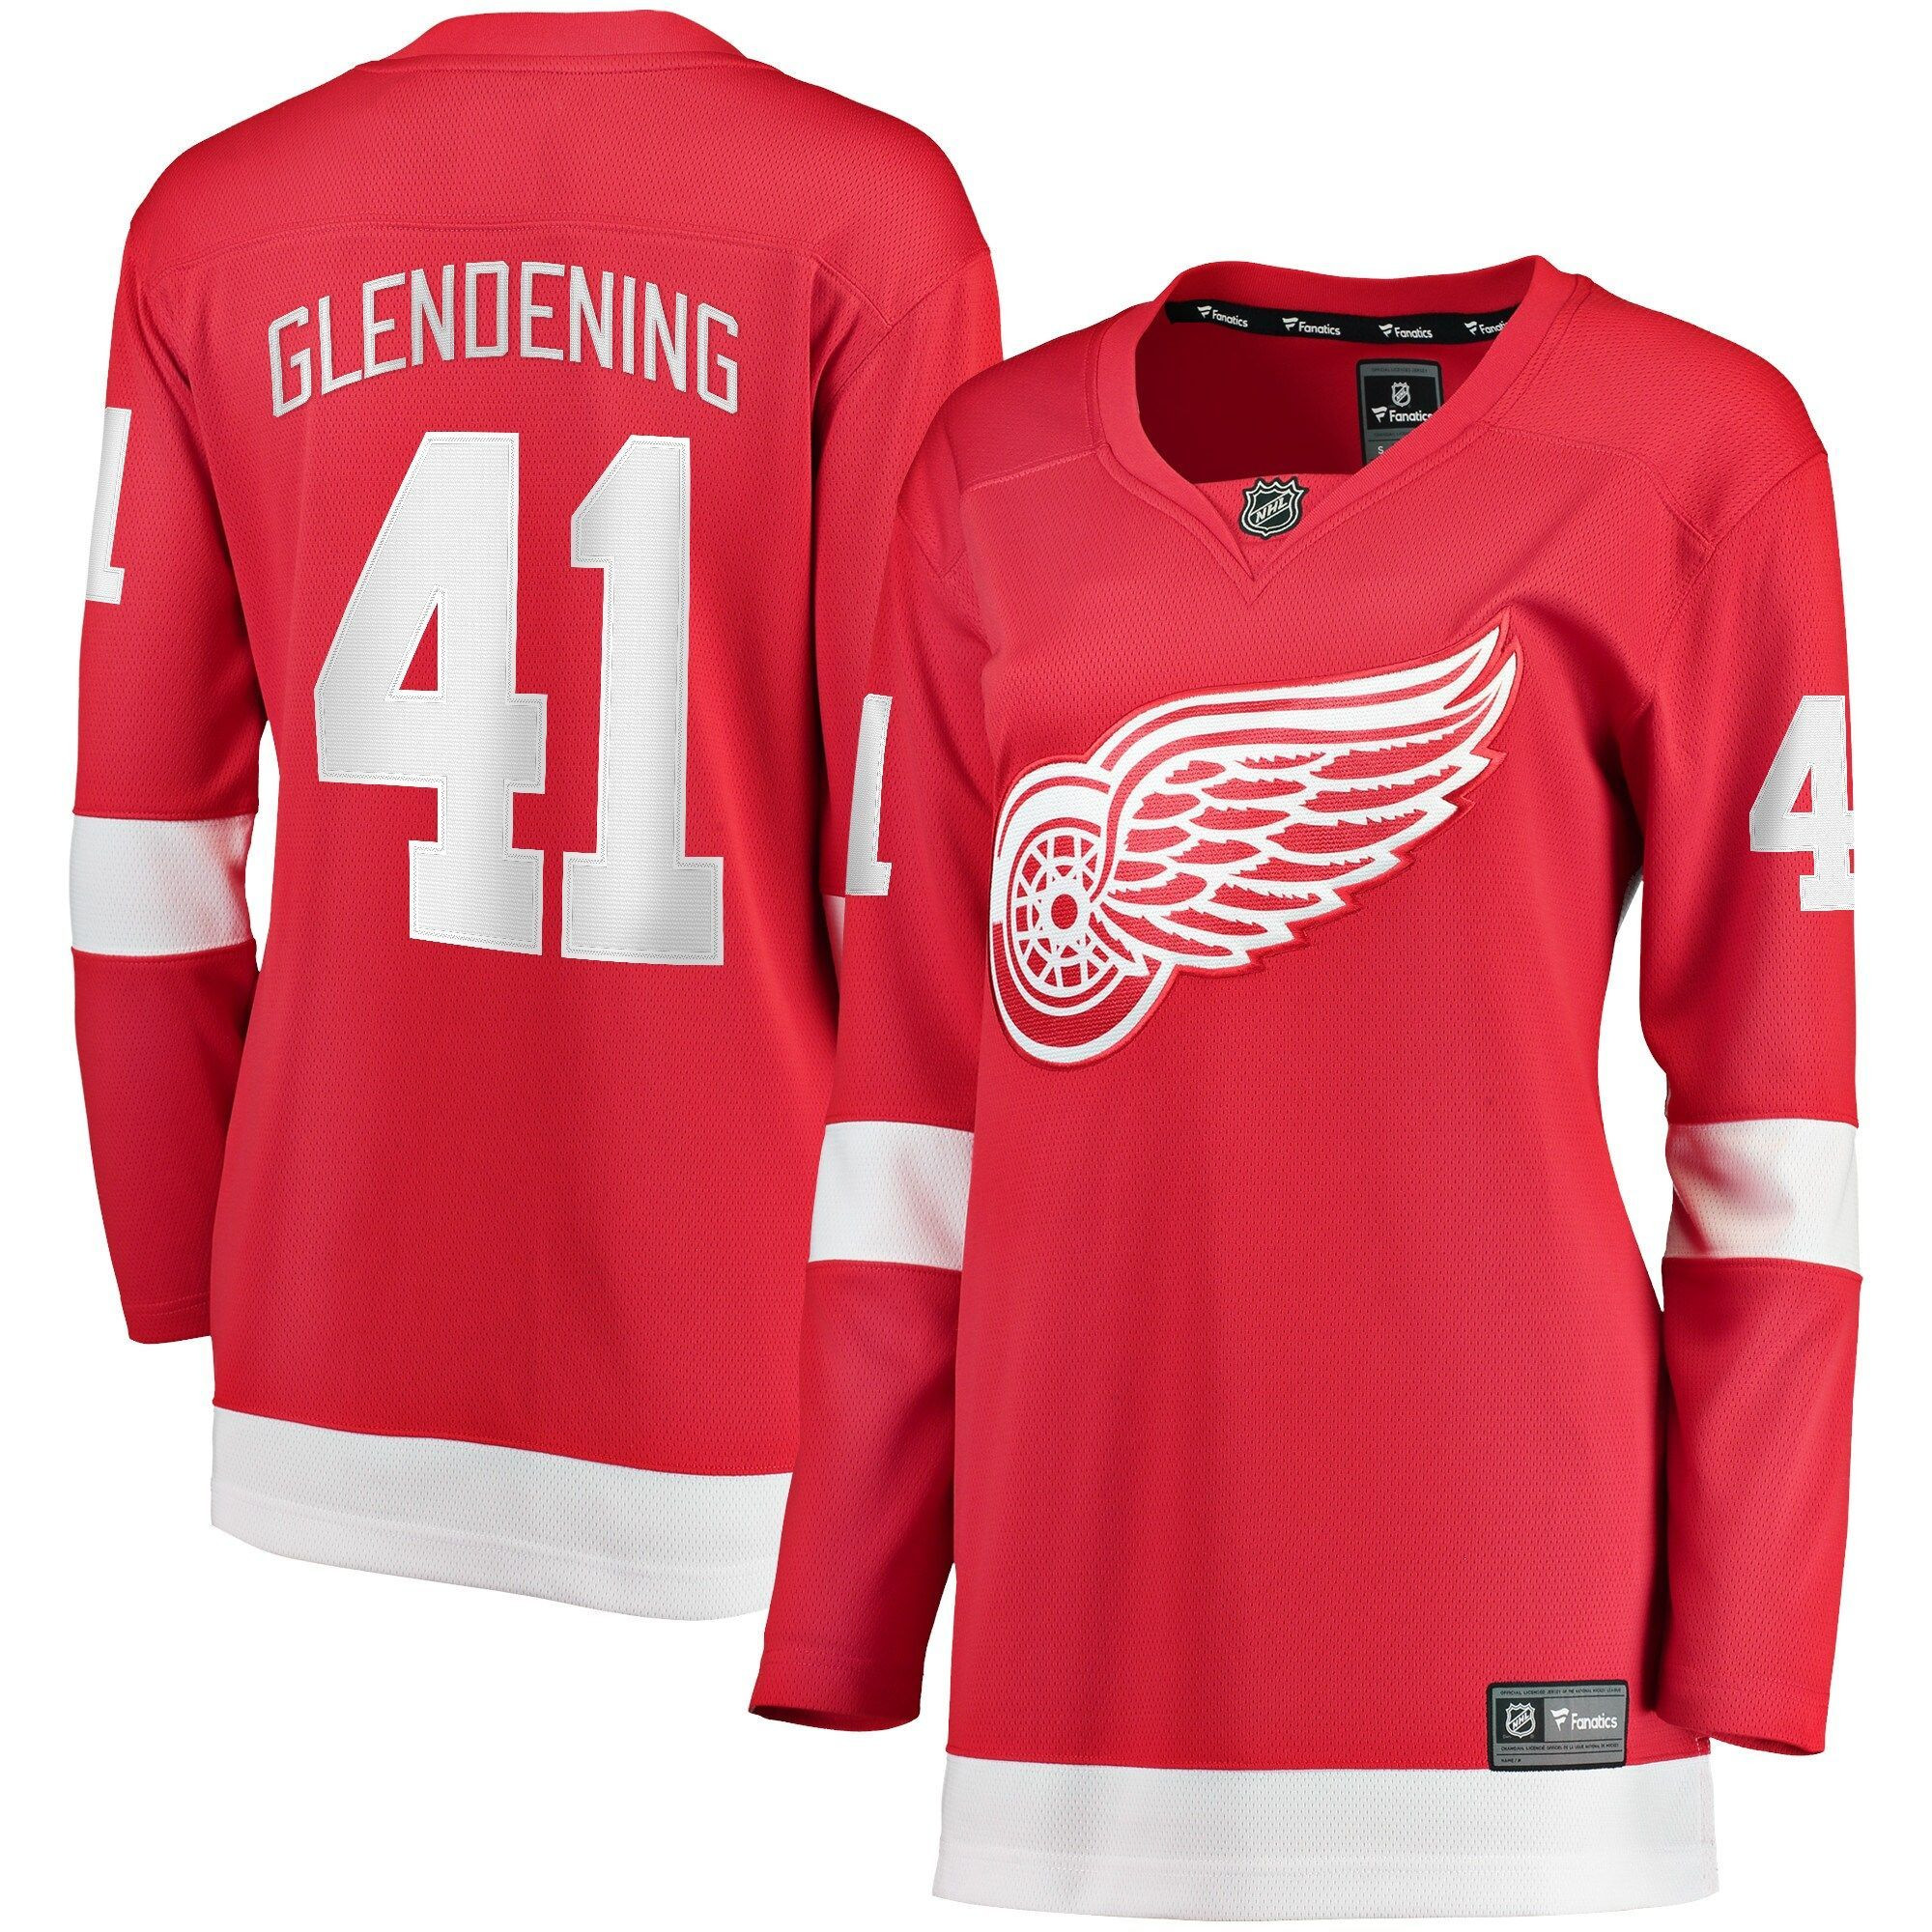 Luke Glendening Detroit Red Wings Womens Home Player Red Jersey gift for Detroit Red Wings fans